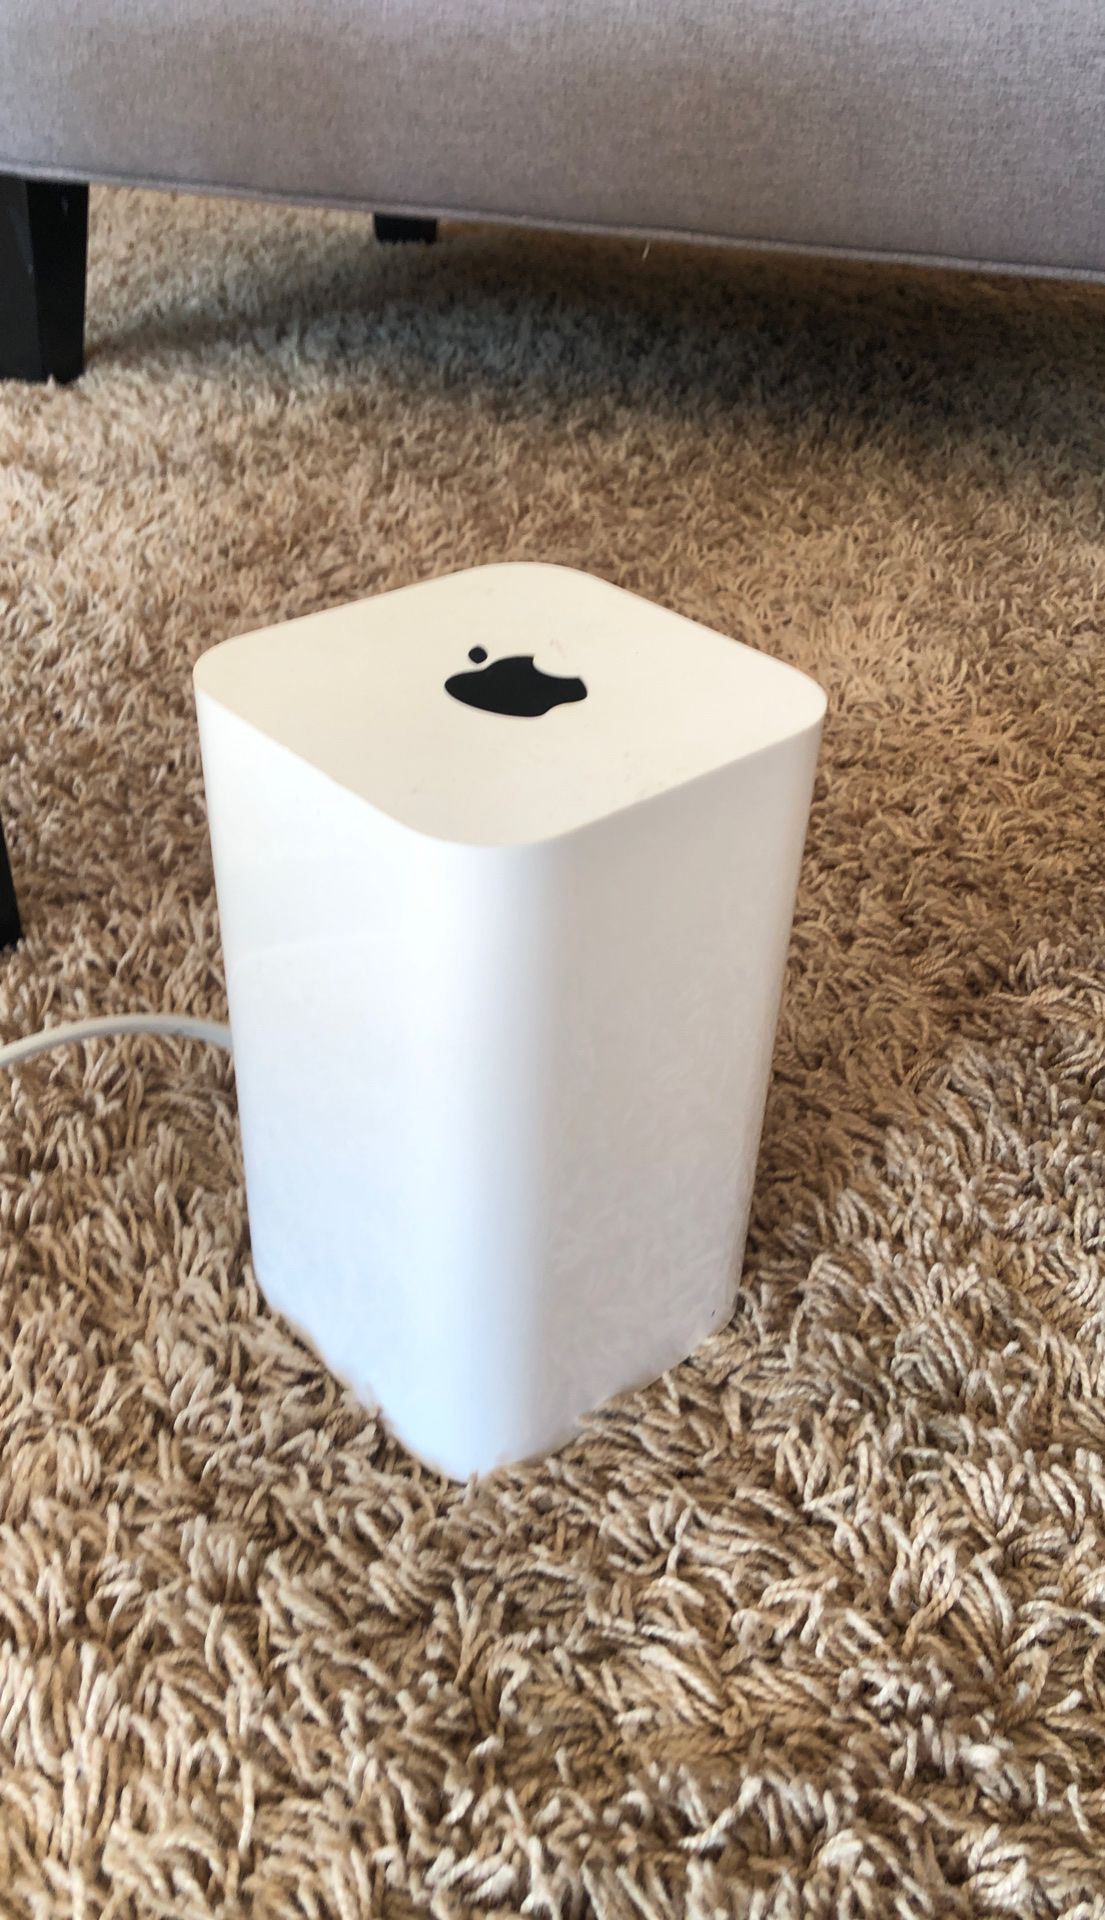 Apple AirPort Extreme WiFi Router